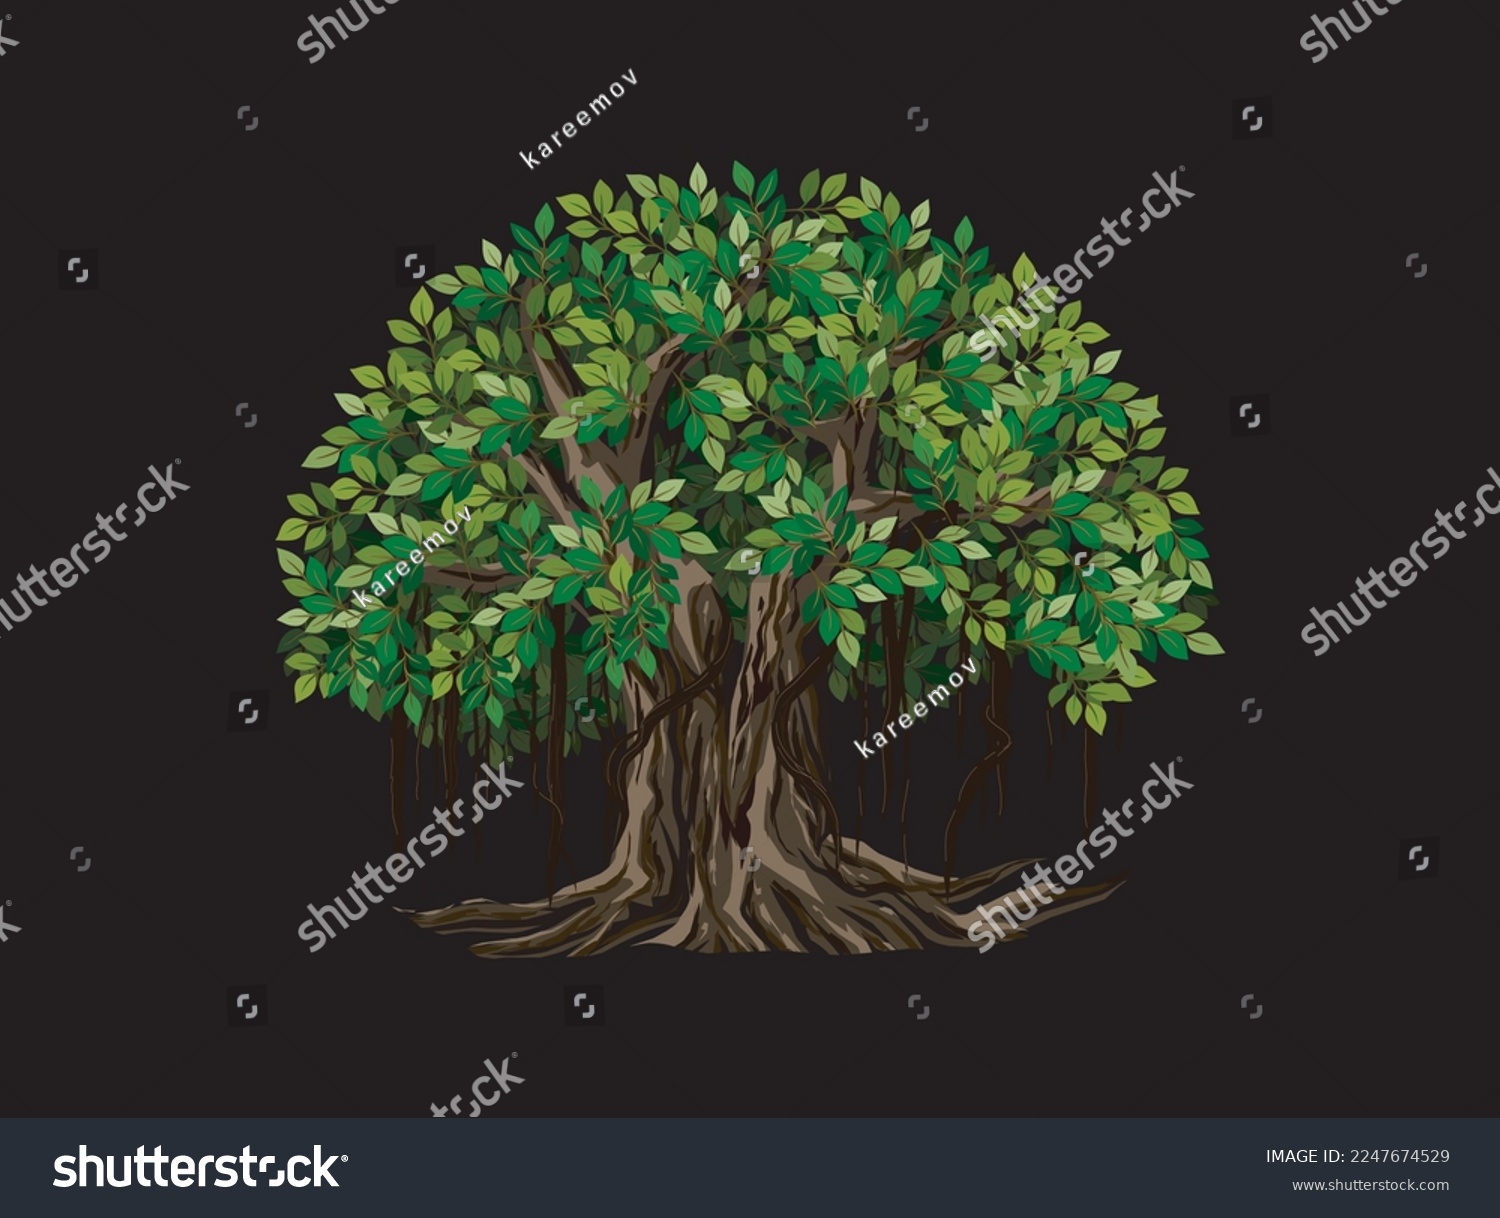 SVG of Ancient Banyan tree vector illustrations, hand drawn art isolated on black background. svg